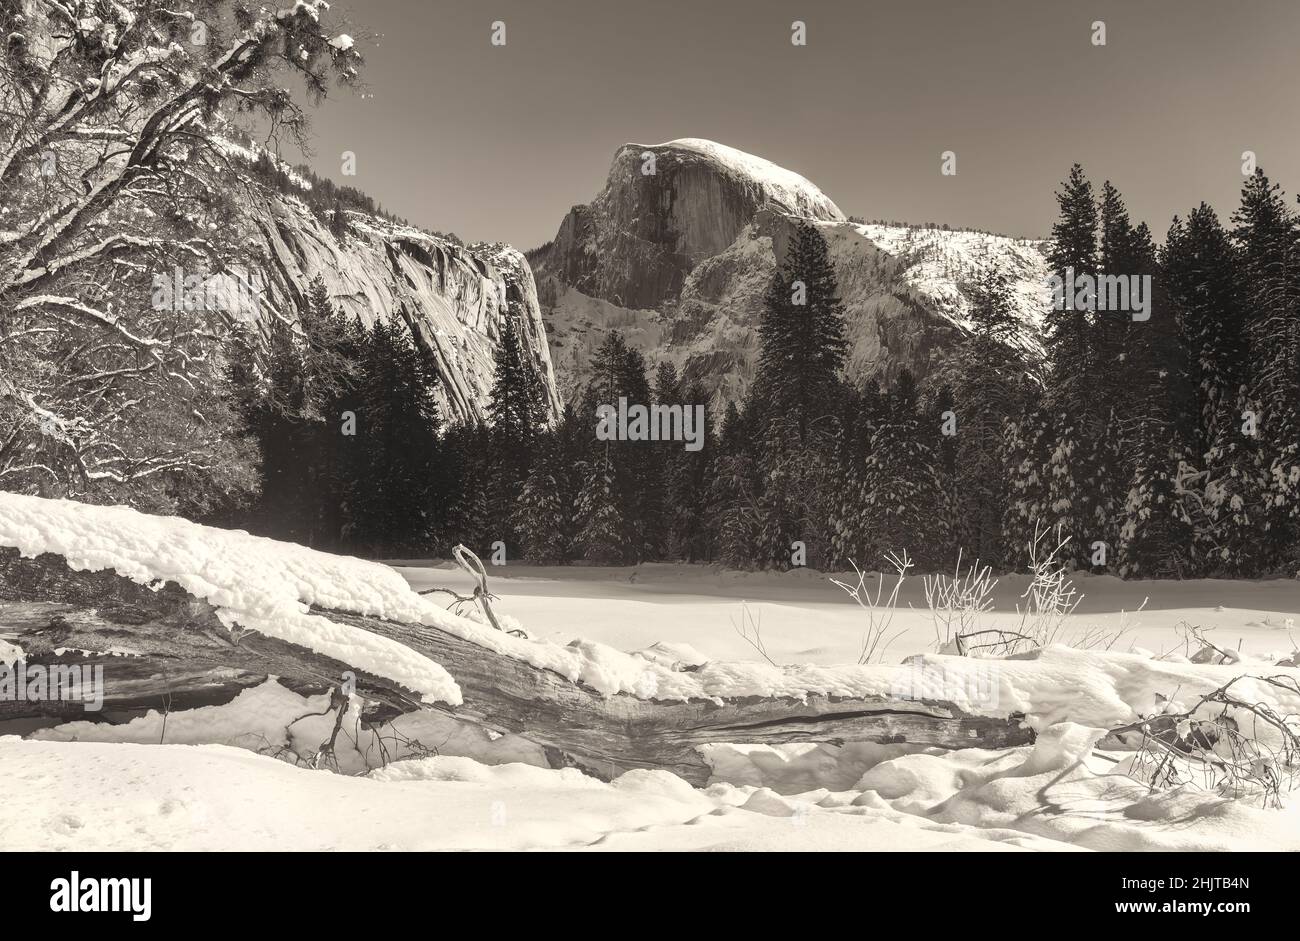 Cook Meadow covered with snow, with view of the iconic Half Dome Peak, in Yosemite National Park, California, USA. Stock Photo